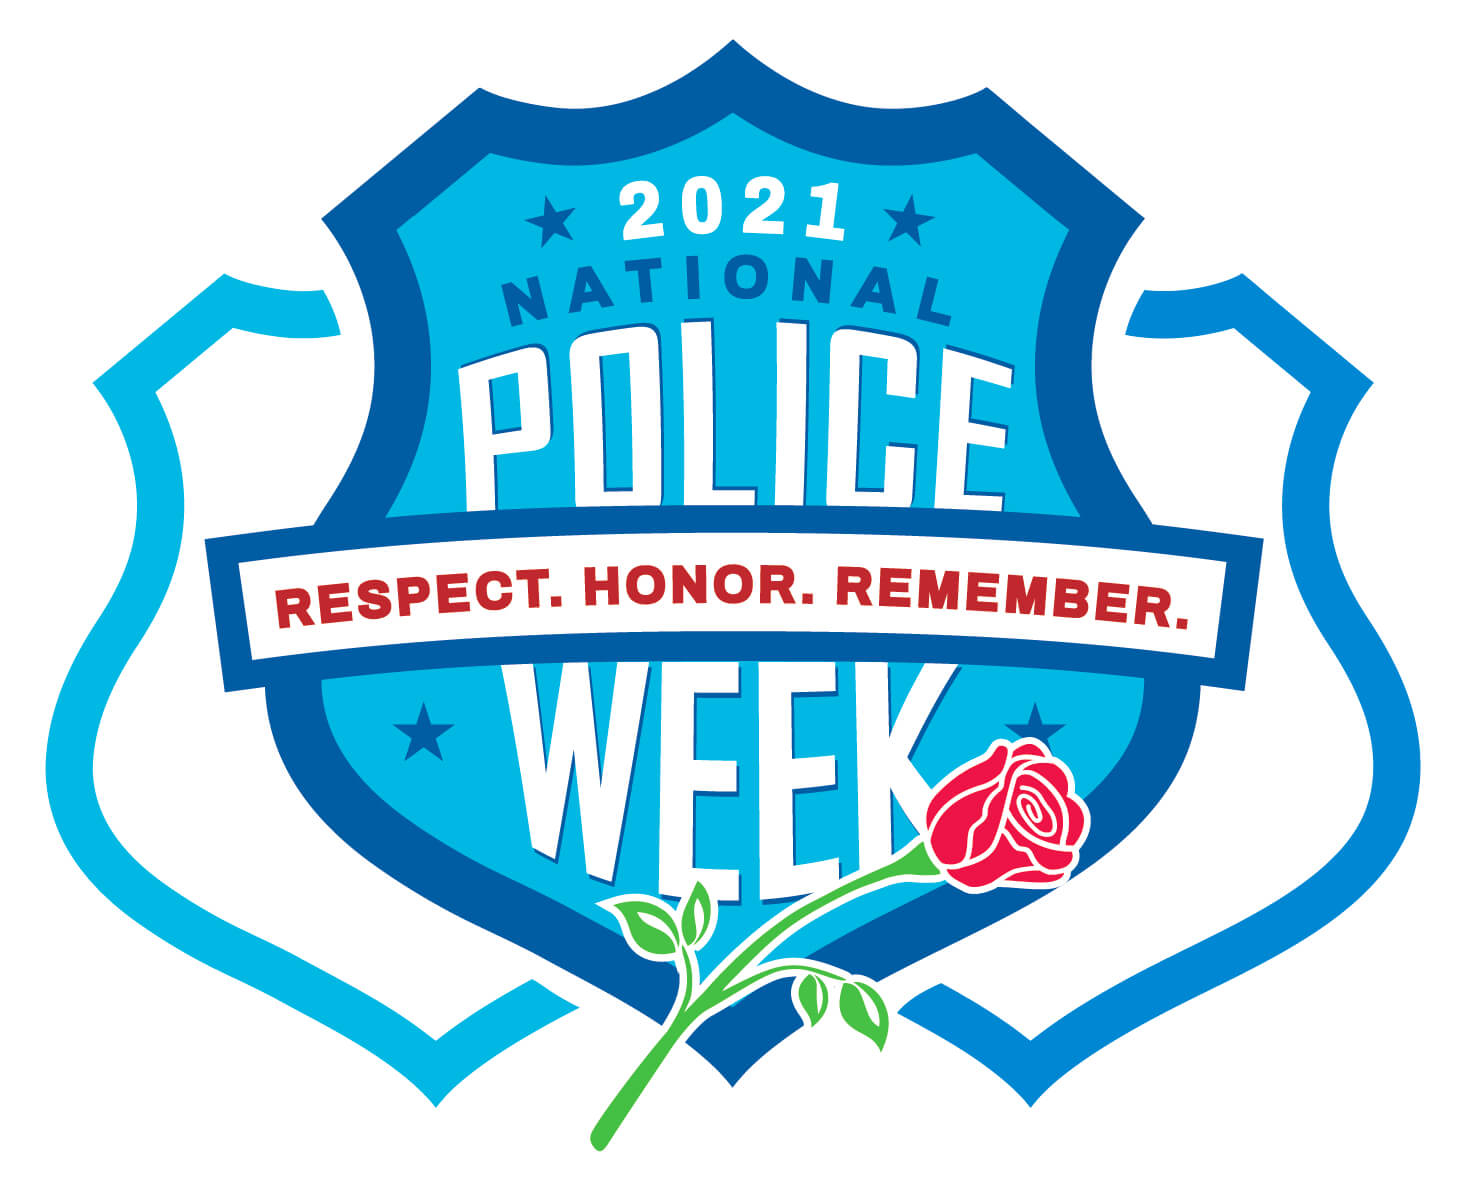 Liberty University honors law enforcement for National Police Week